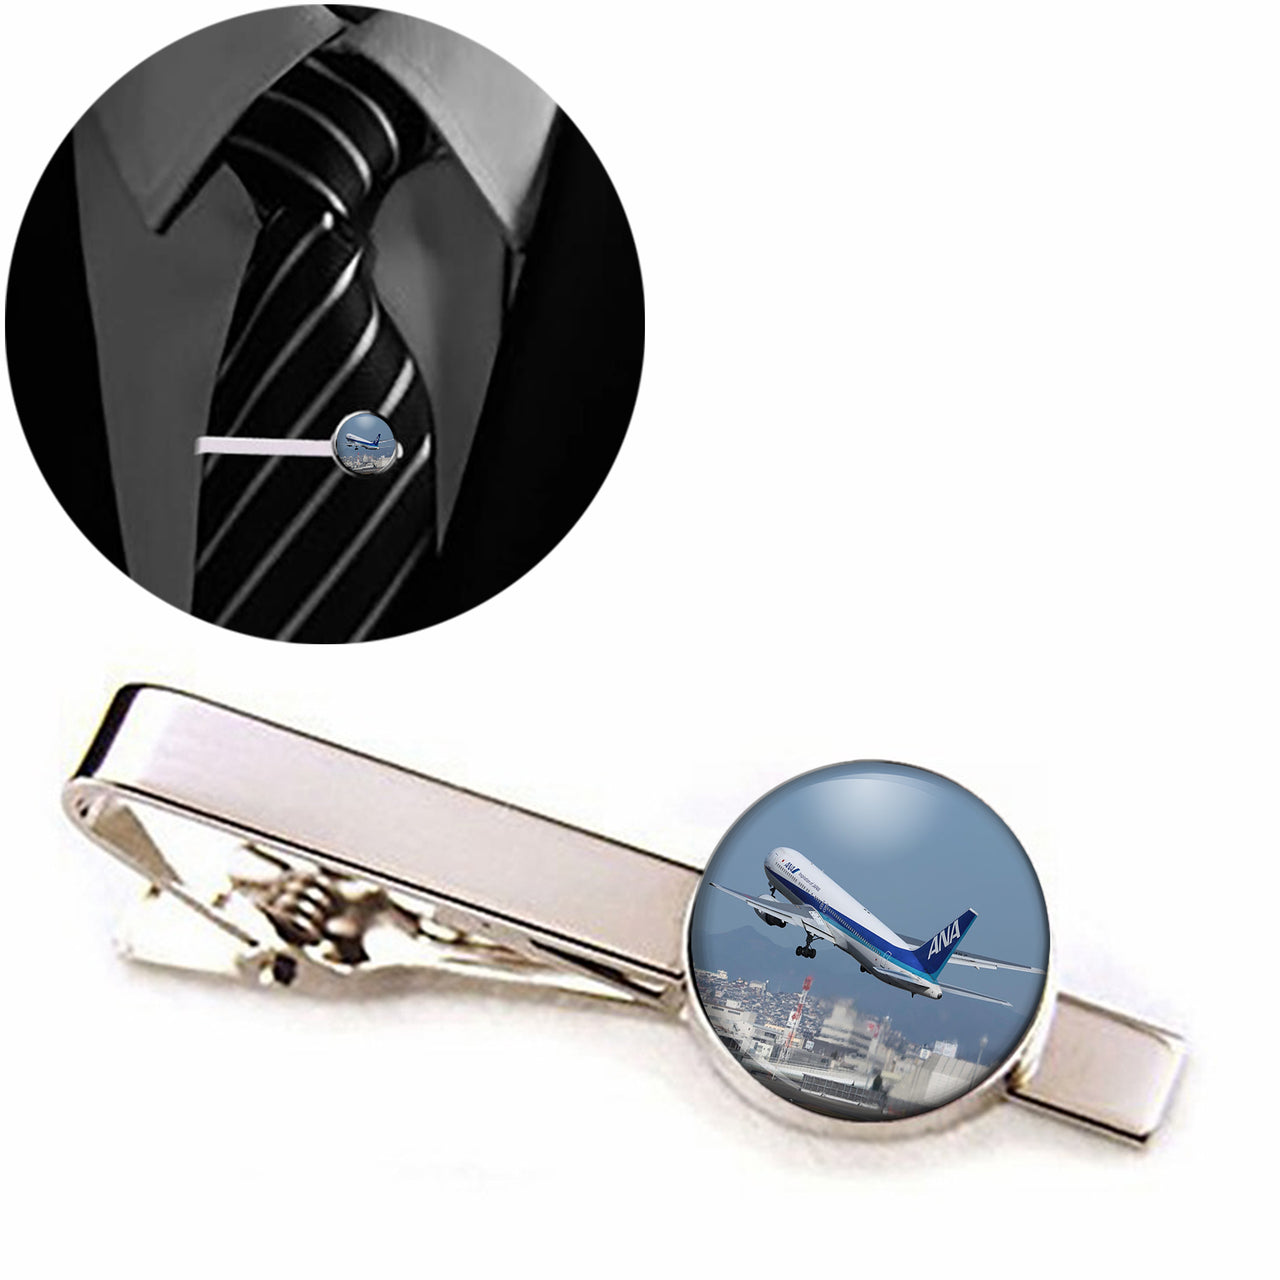 Departing ANA's Boeing 767 Designed Tie Clips